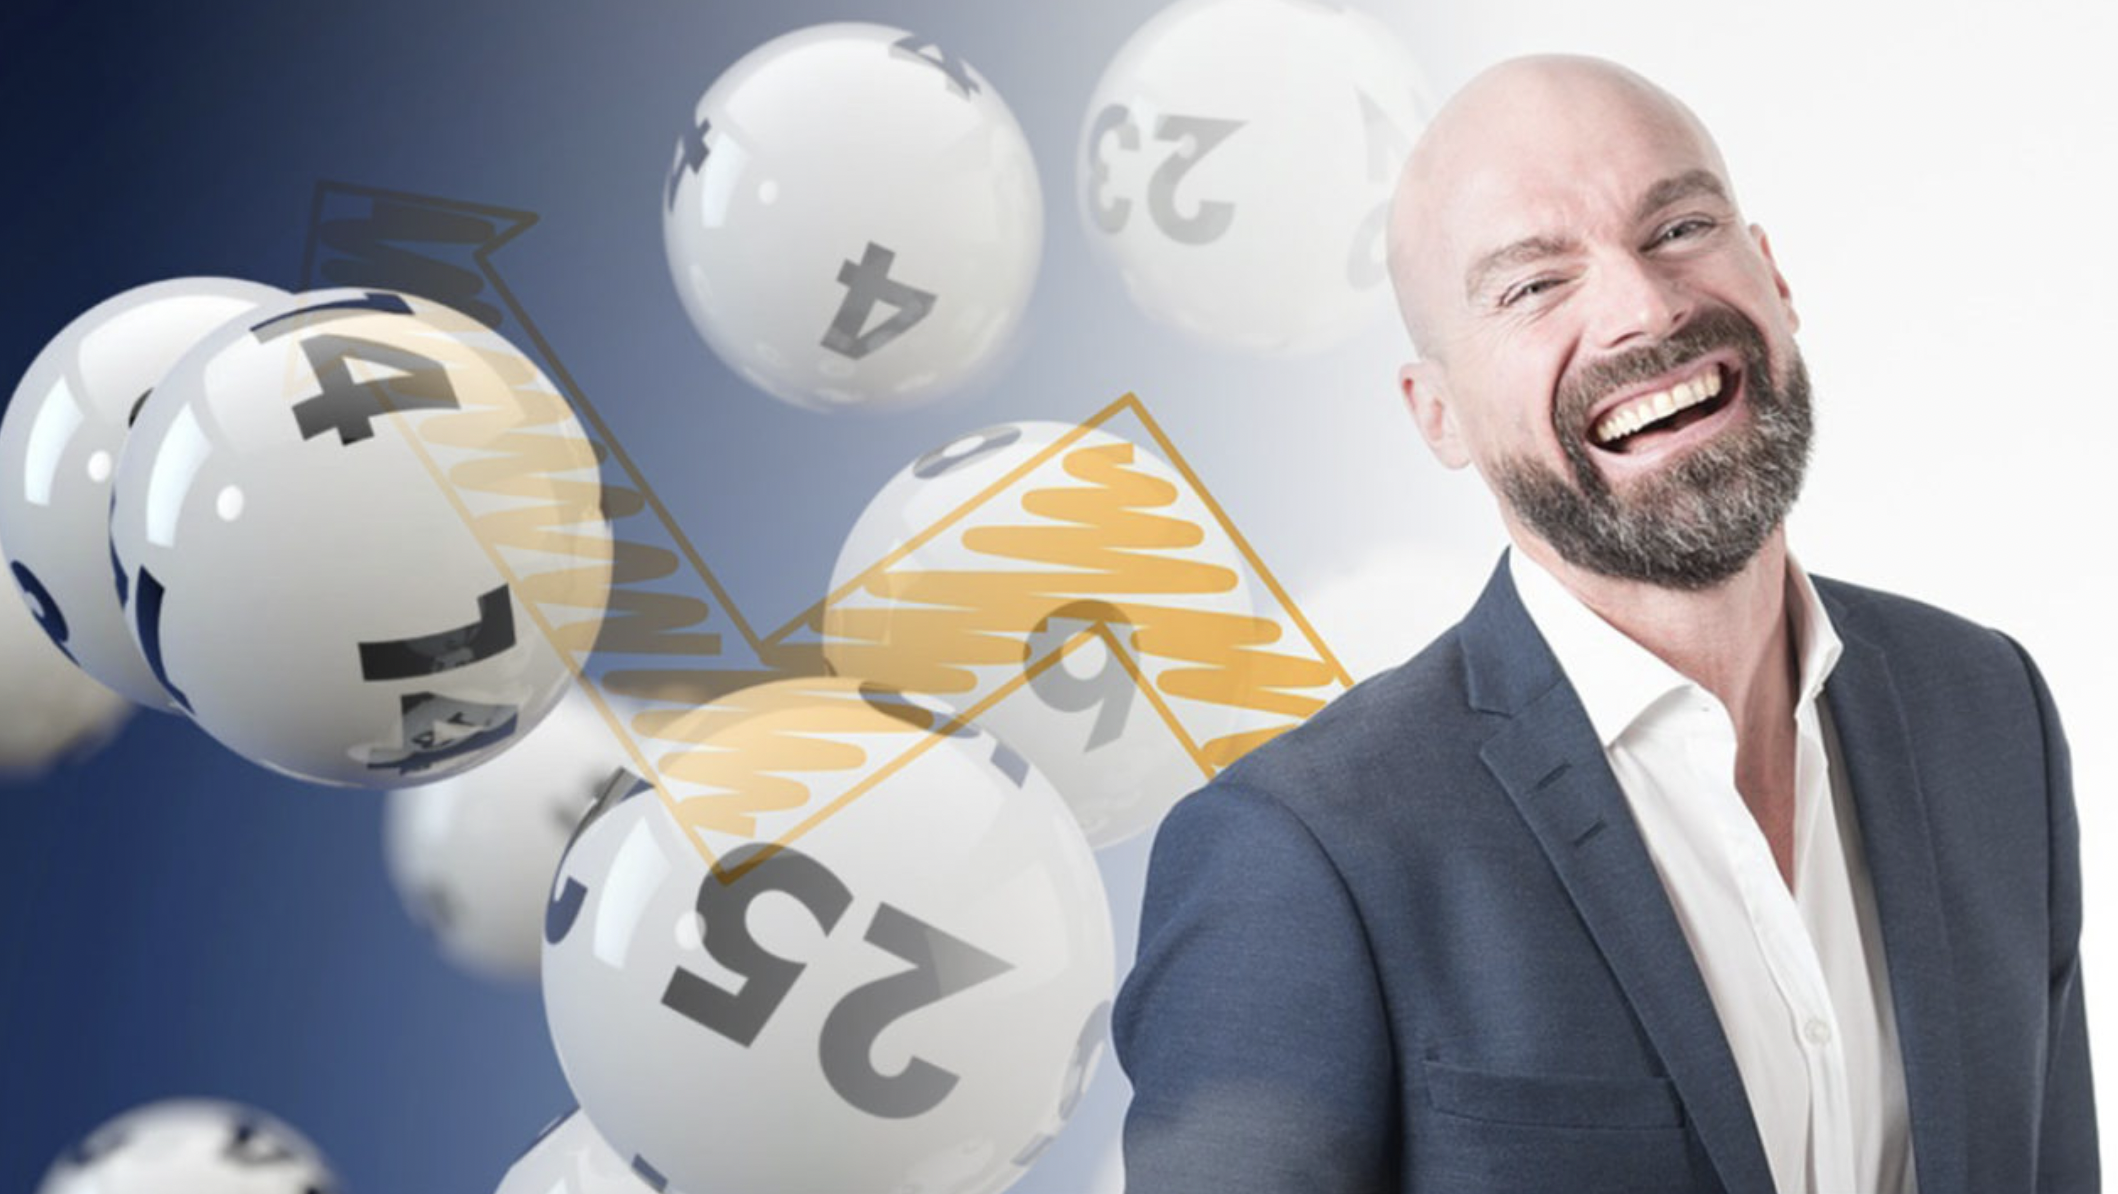 7 Simple Tips to Increase Your Odds and Win the Lottery